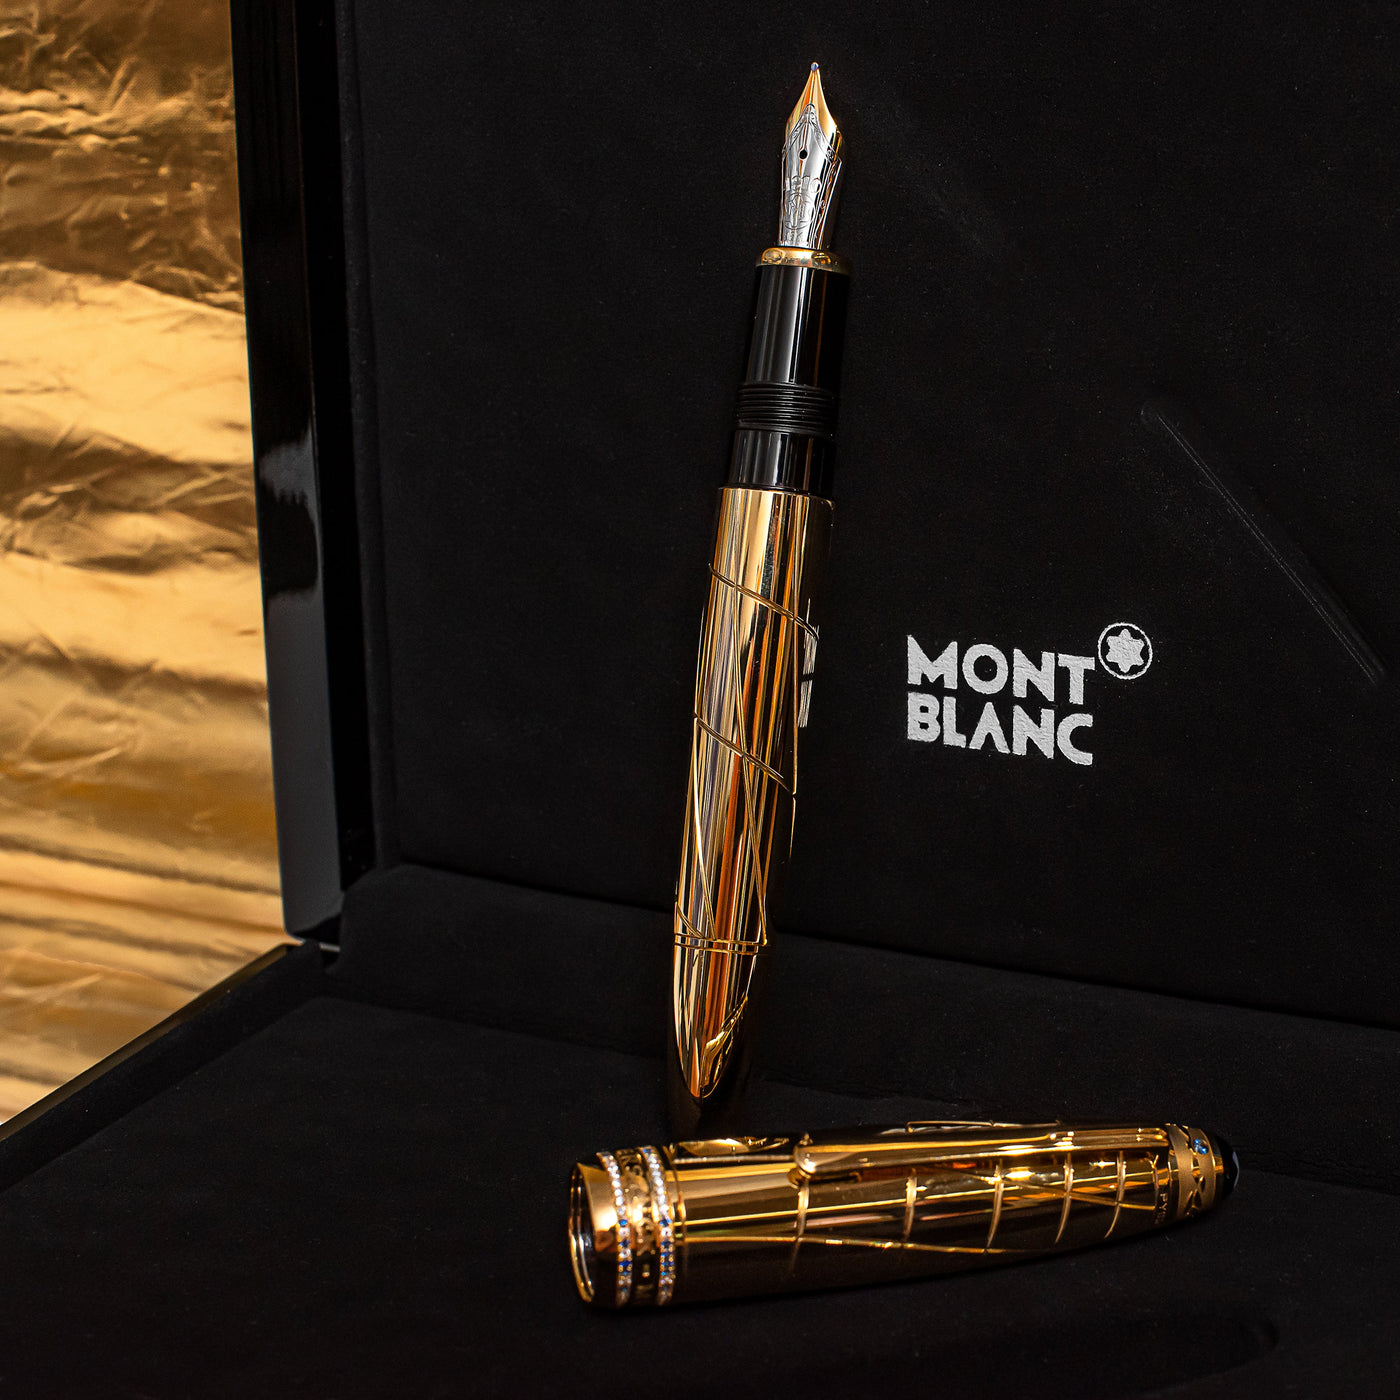 Montblanc Meisterstuck 146 Atelier Prives Solid Gold 18k Fountain Pen Limited Edition Uncapped